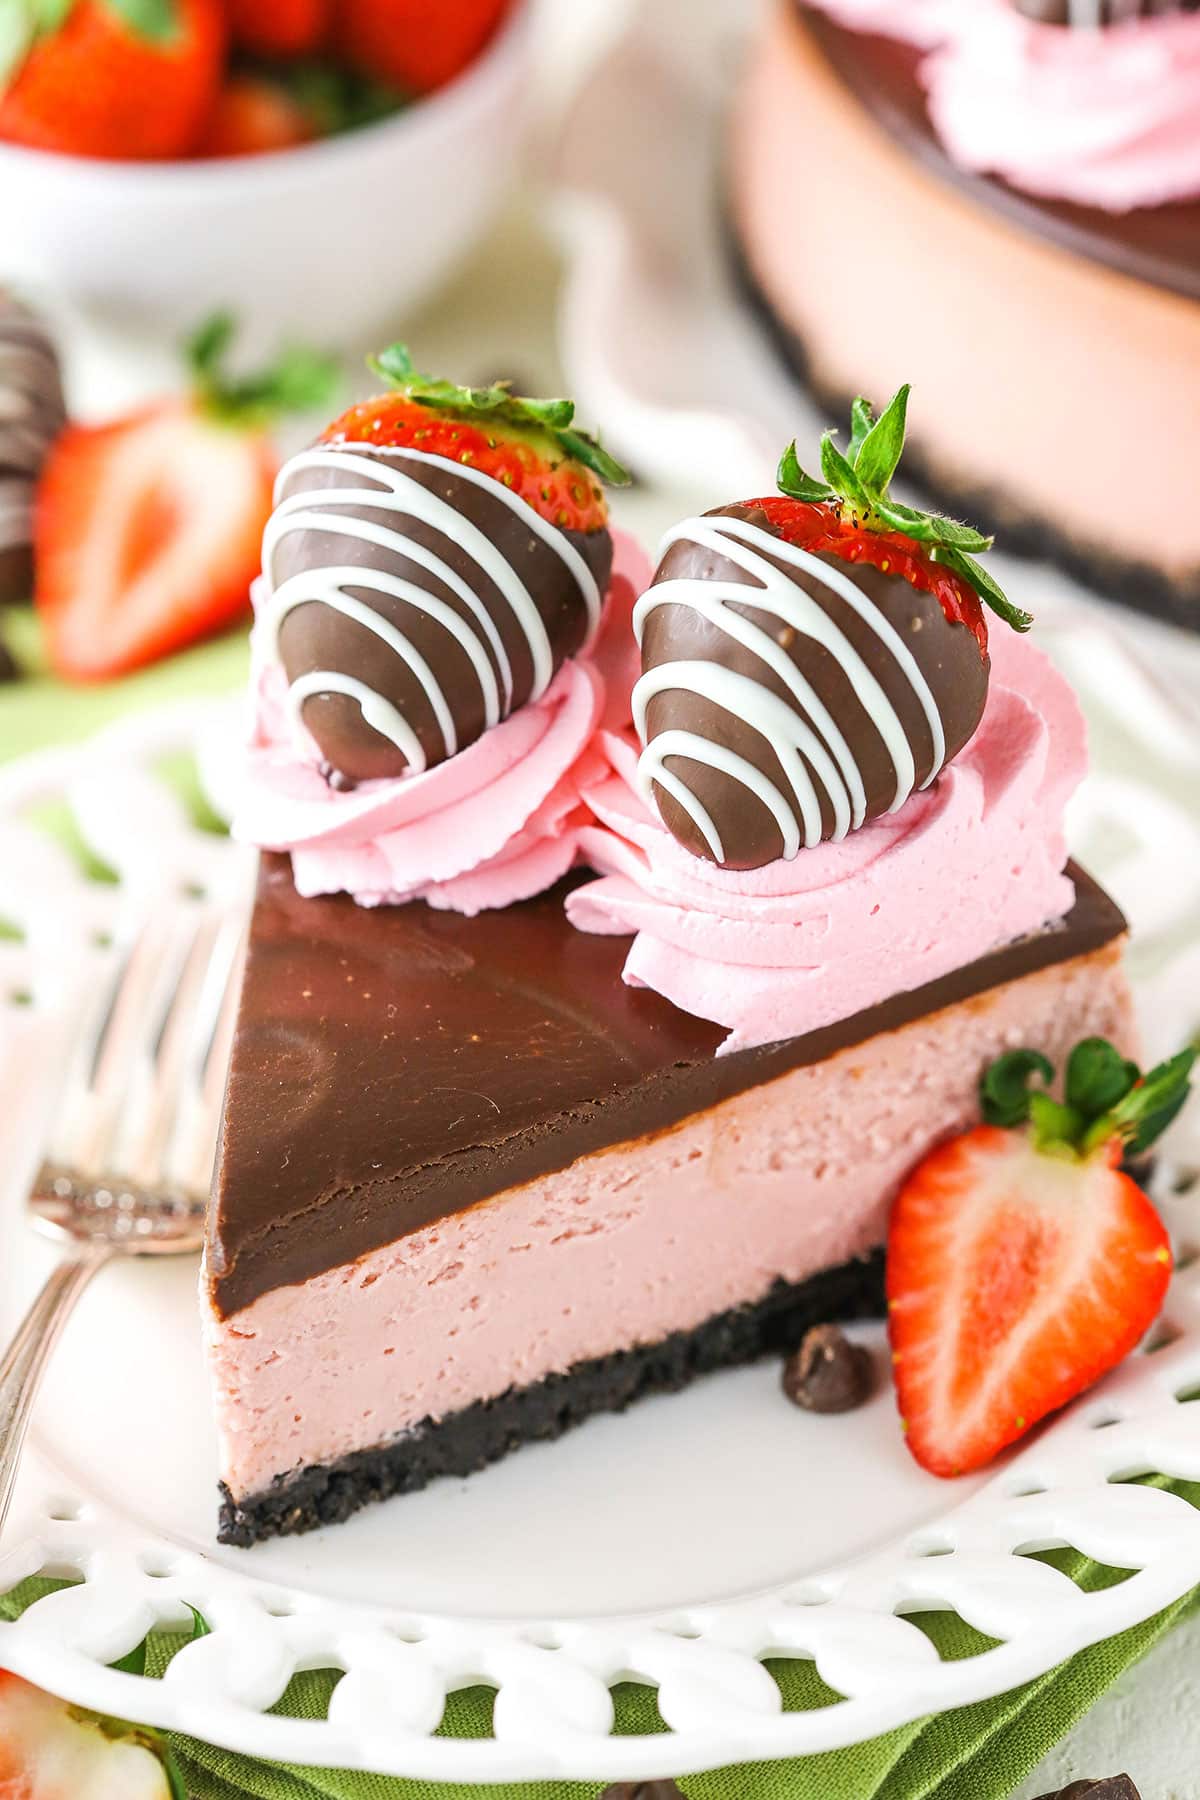 A slice of Chocolate Covered Strawberry Cheesecake next to a silver fork on a white plate